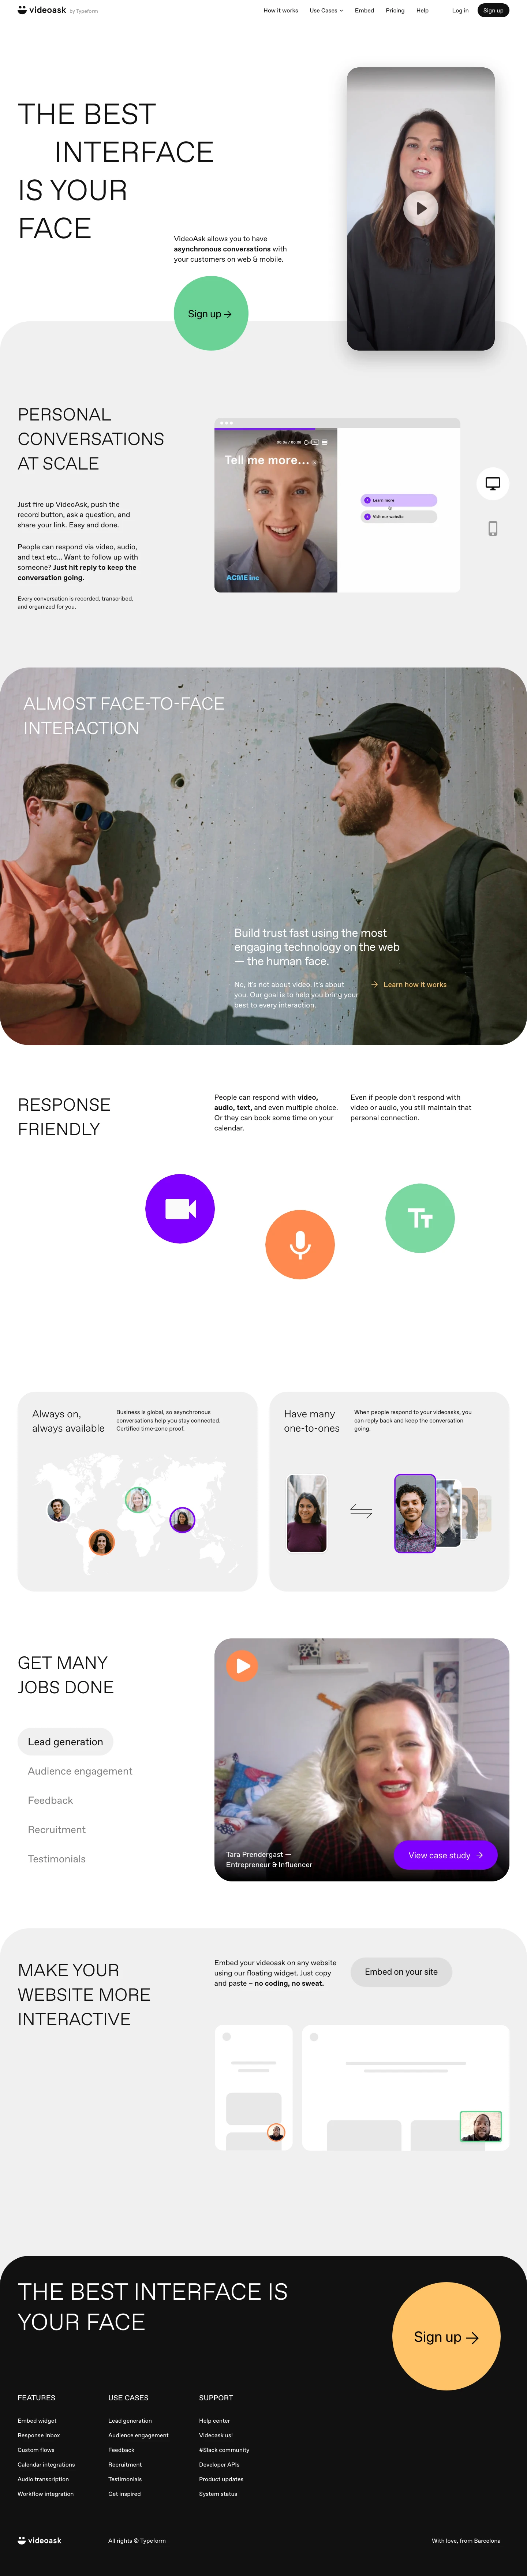 VideoAsk (By Typeform) Landing Page Example: The bestinterface is your face. VideoAsk allows you to have asynchronous conversations with your customers on web & mobile.